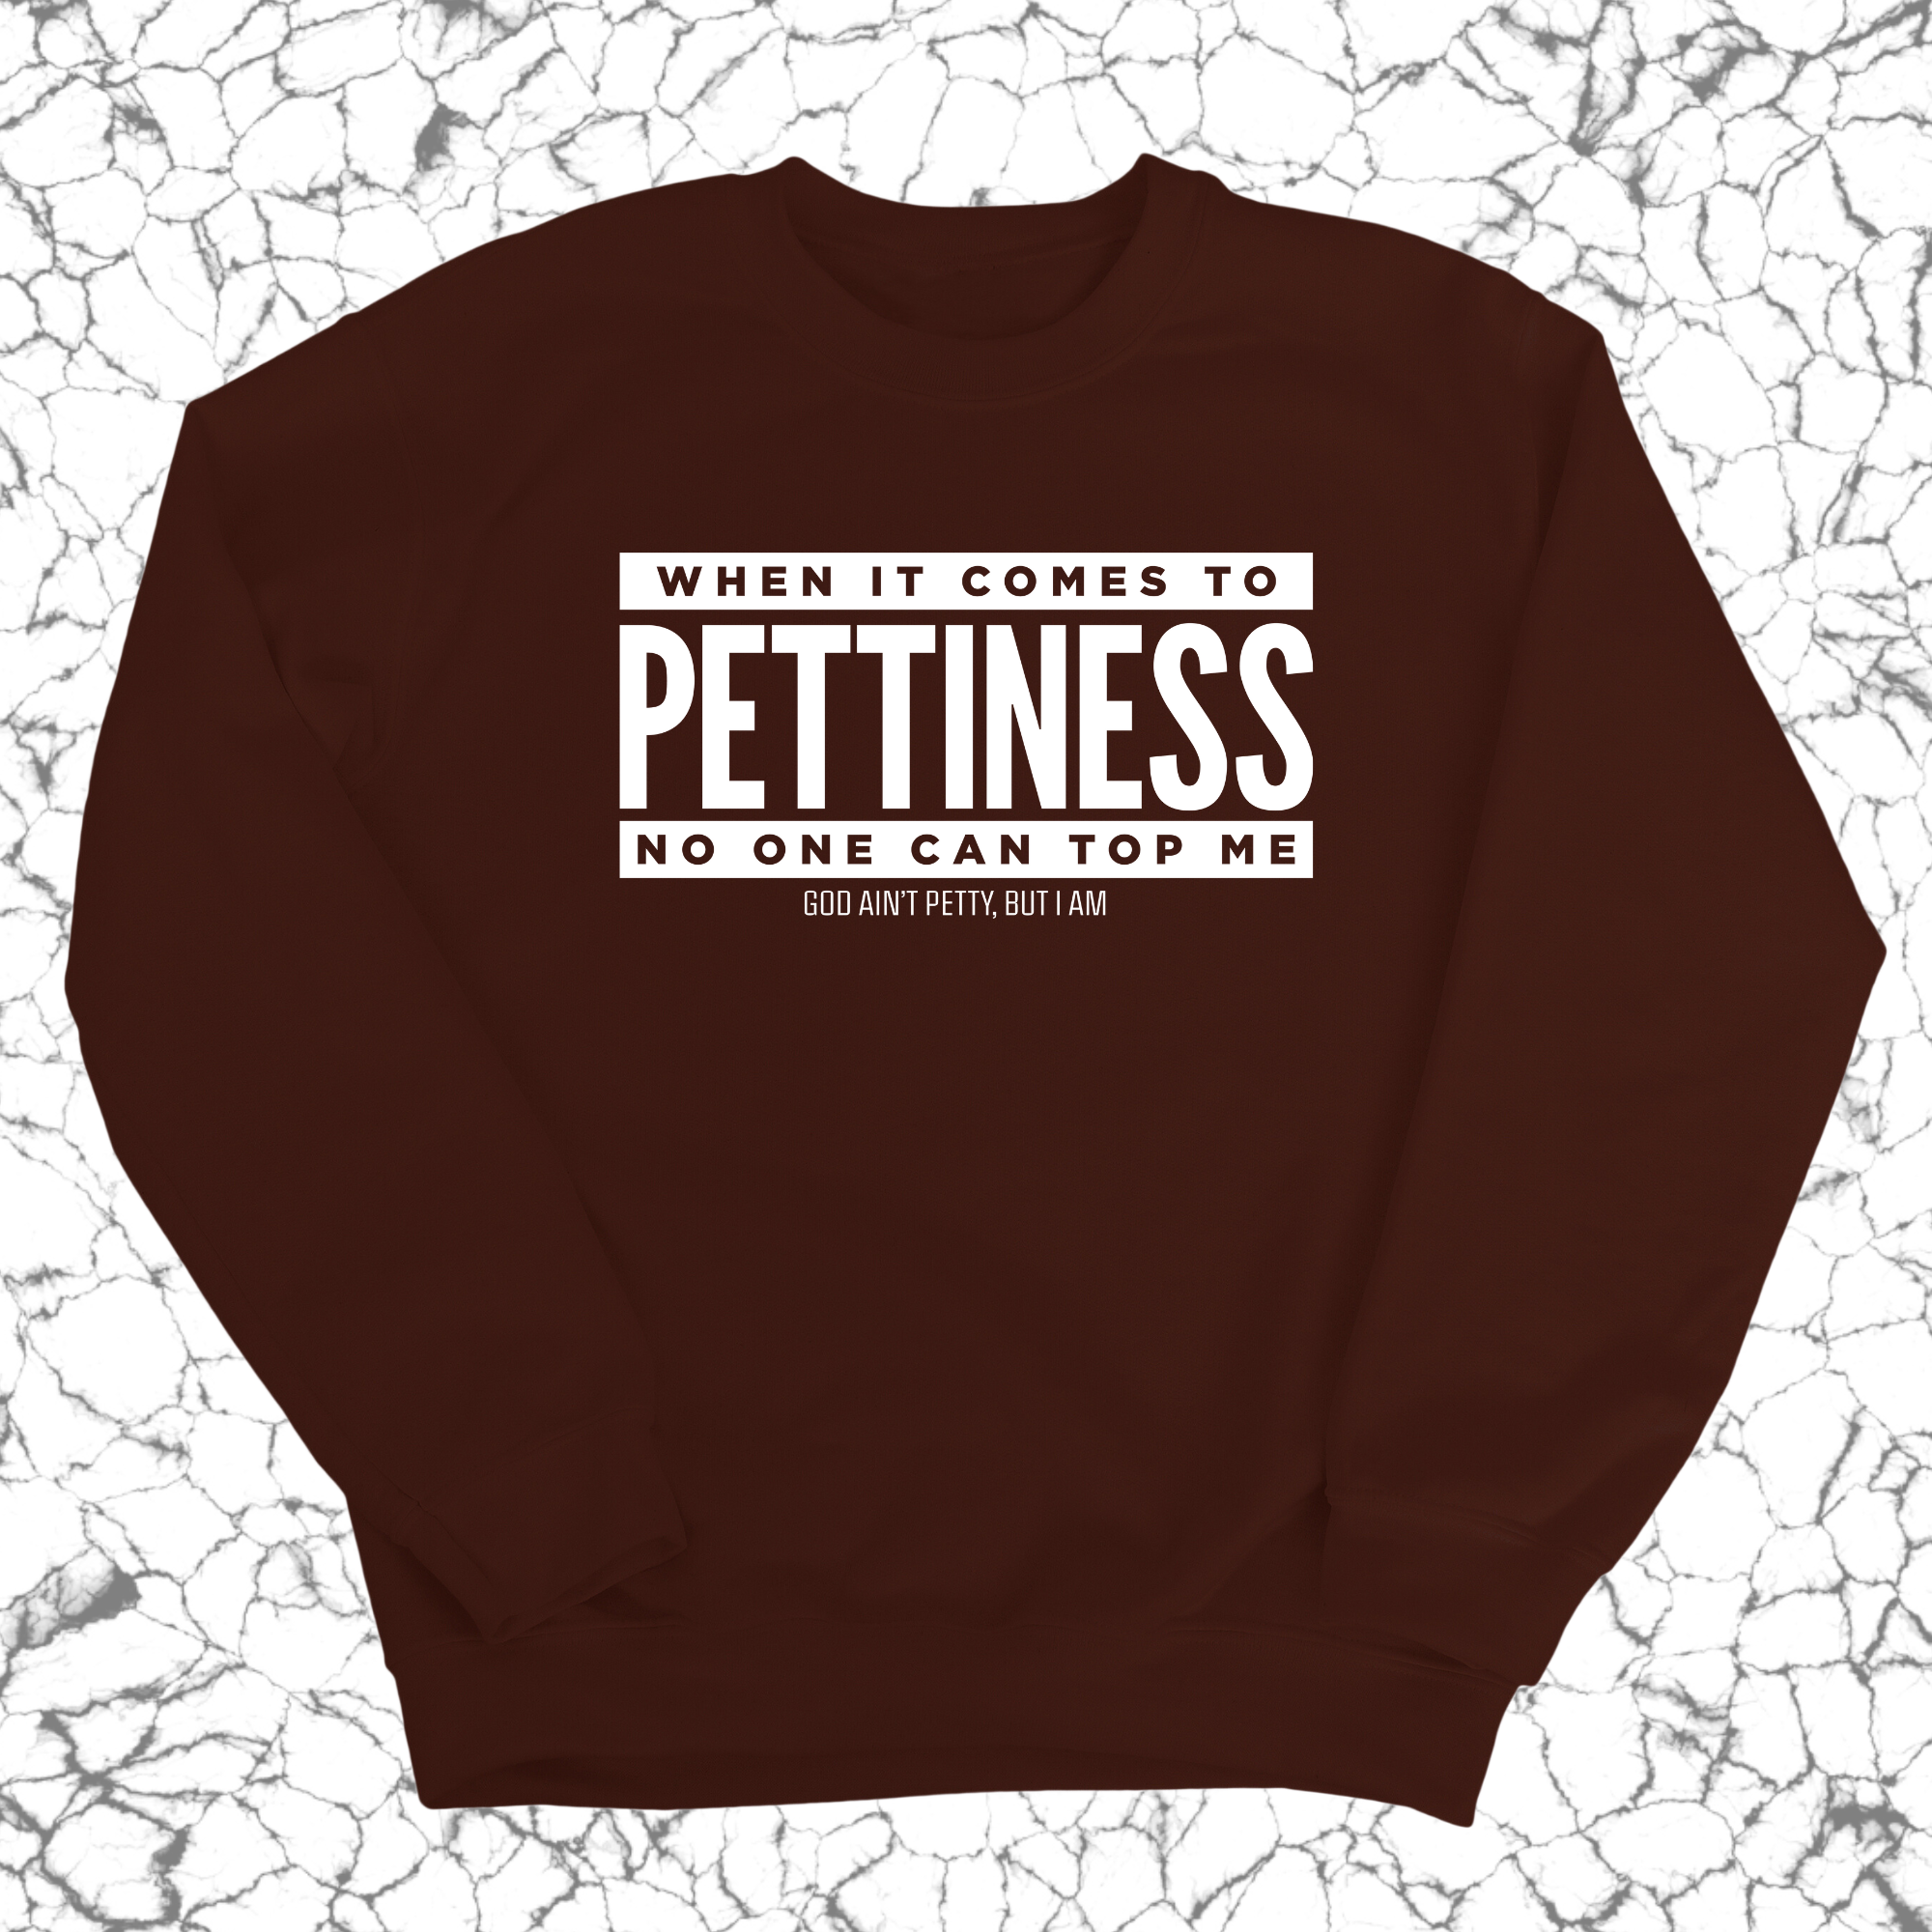 When it comes to Pettiness no one can top me Unisex Sweatshirt-Sweatshirt-The Original God Ain't Petty But I Am